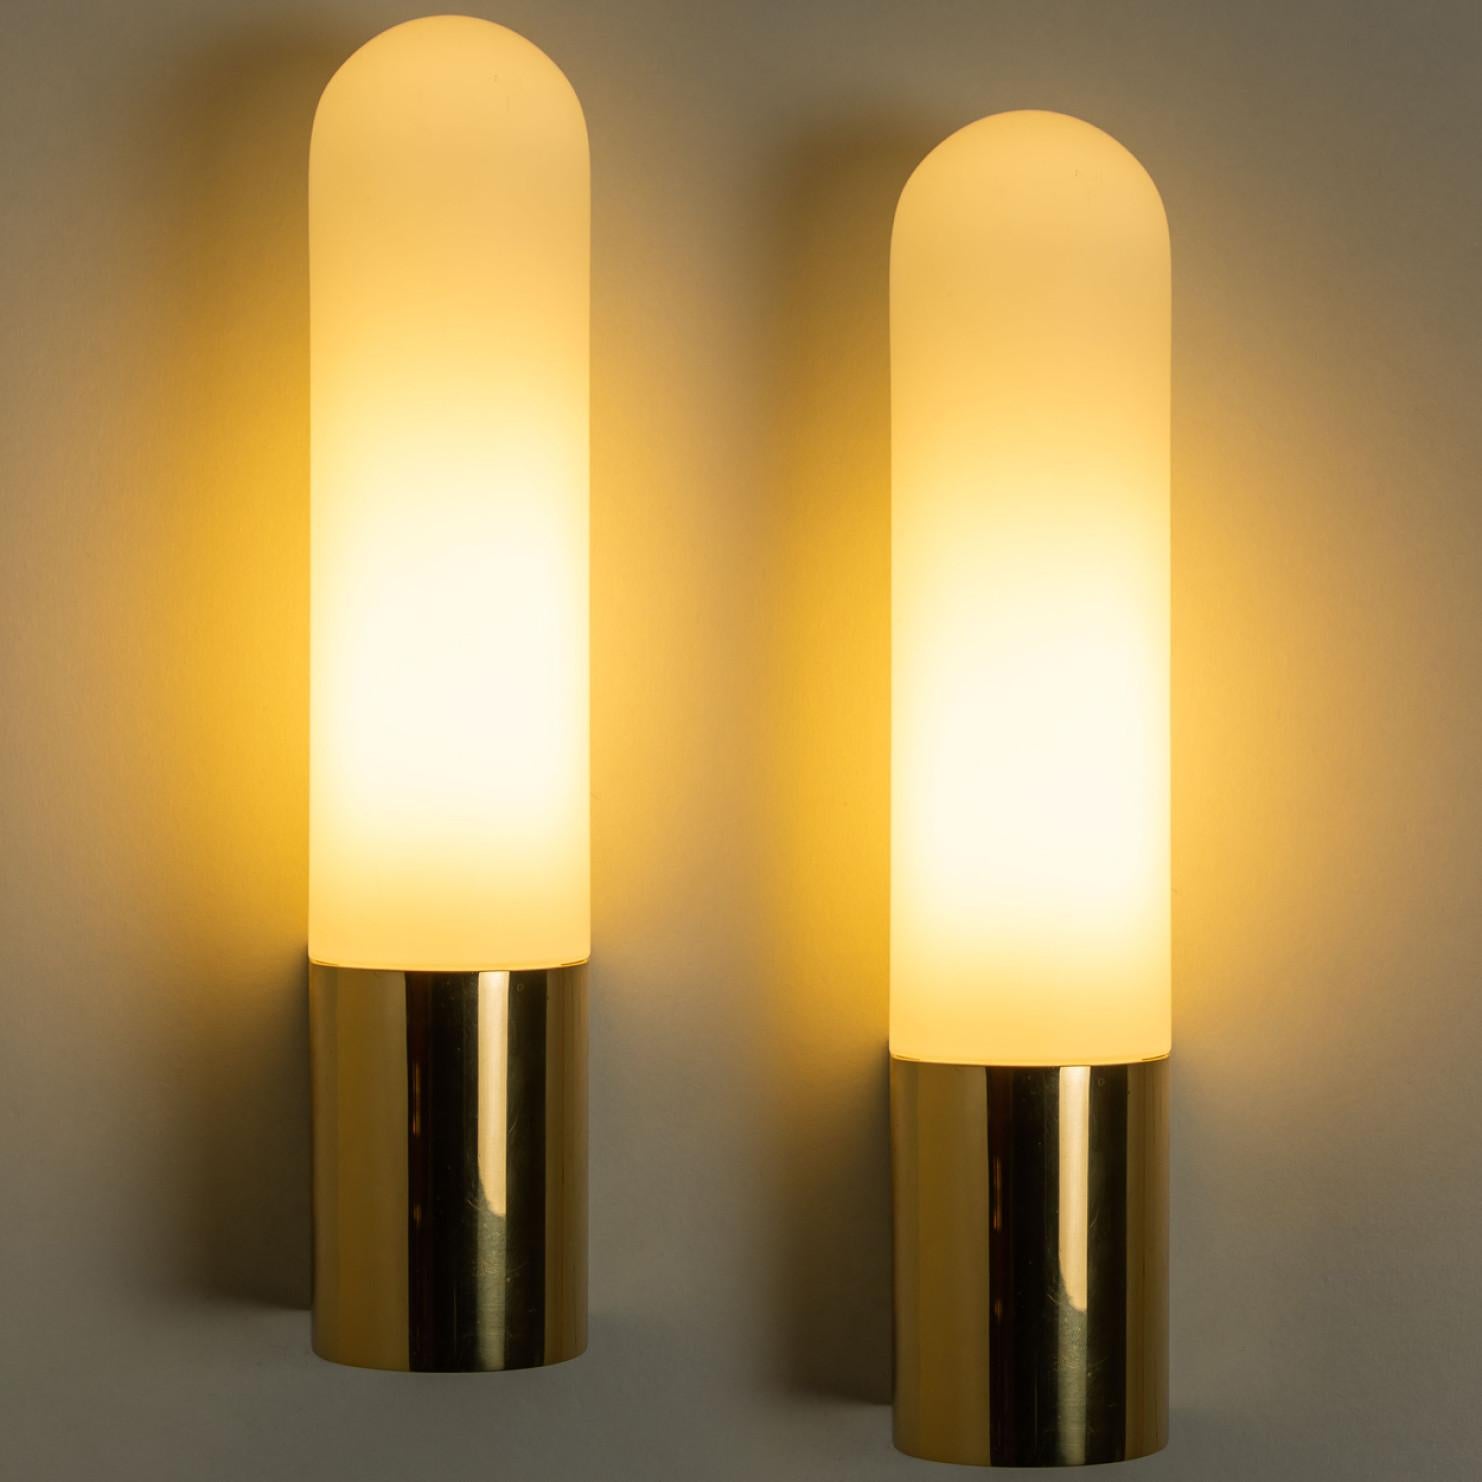 Several Opaque Glass / Brass Wall Lights by Limburg, Germany, 1970s For Sale 1